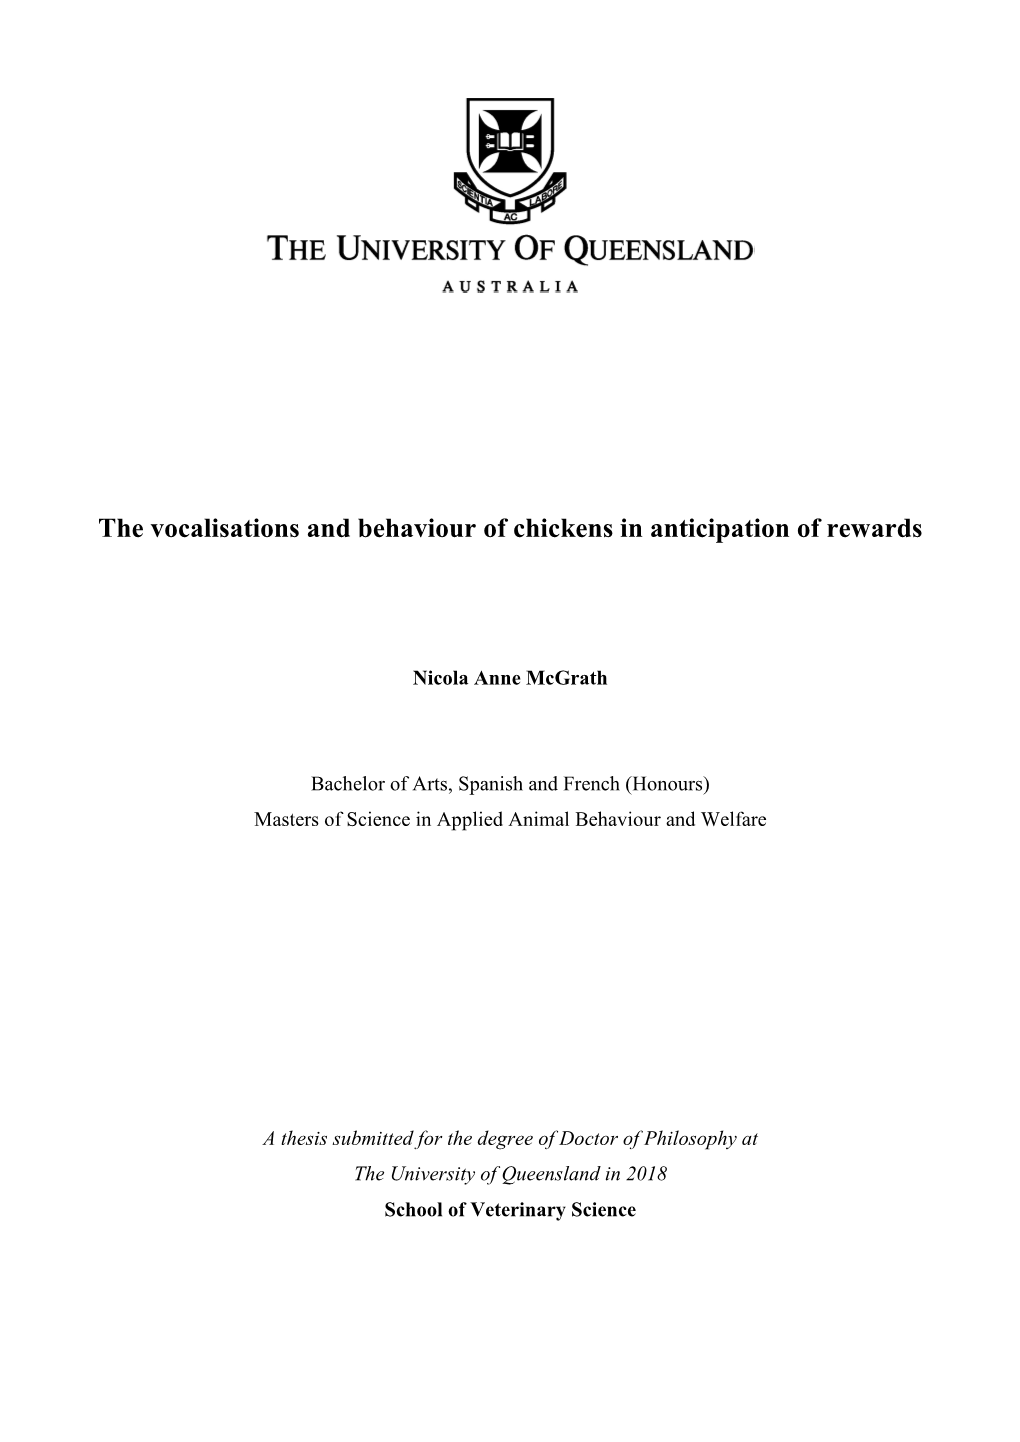 The Vocalisations and Behaviour of Chickens in Anticipation of Rewards